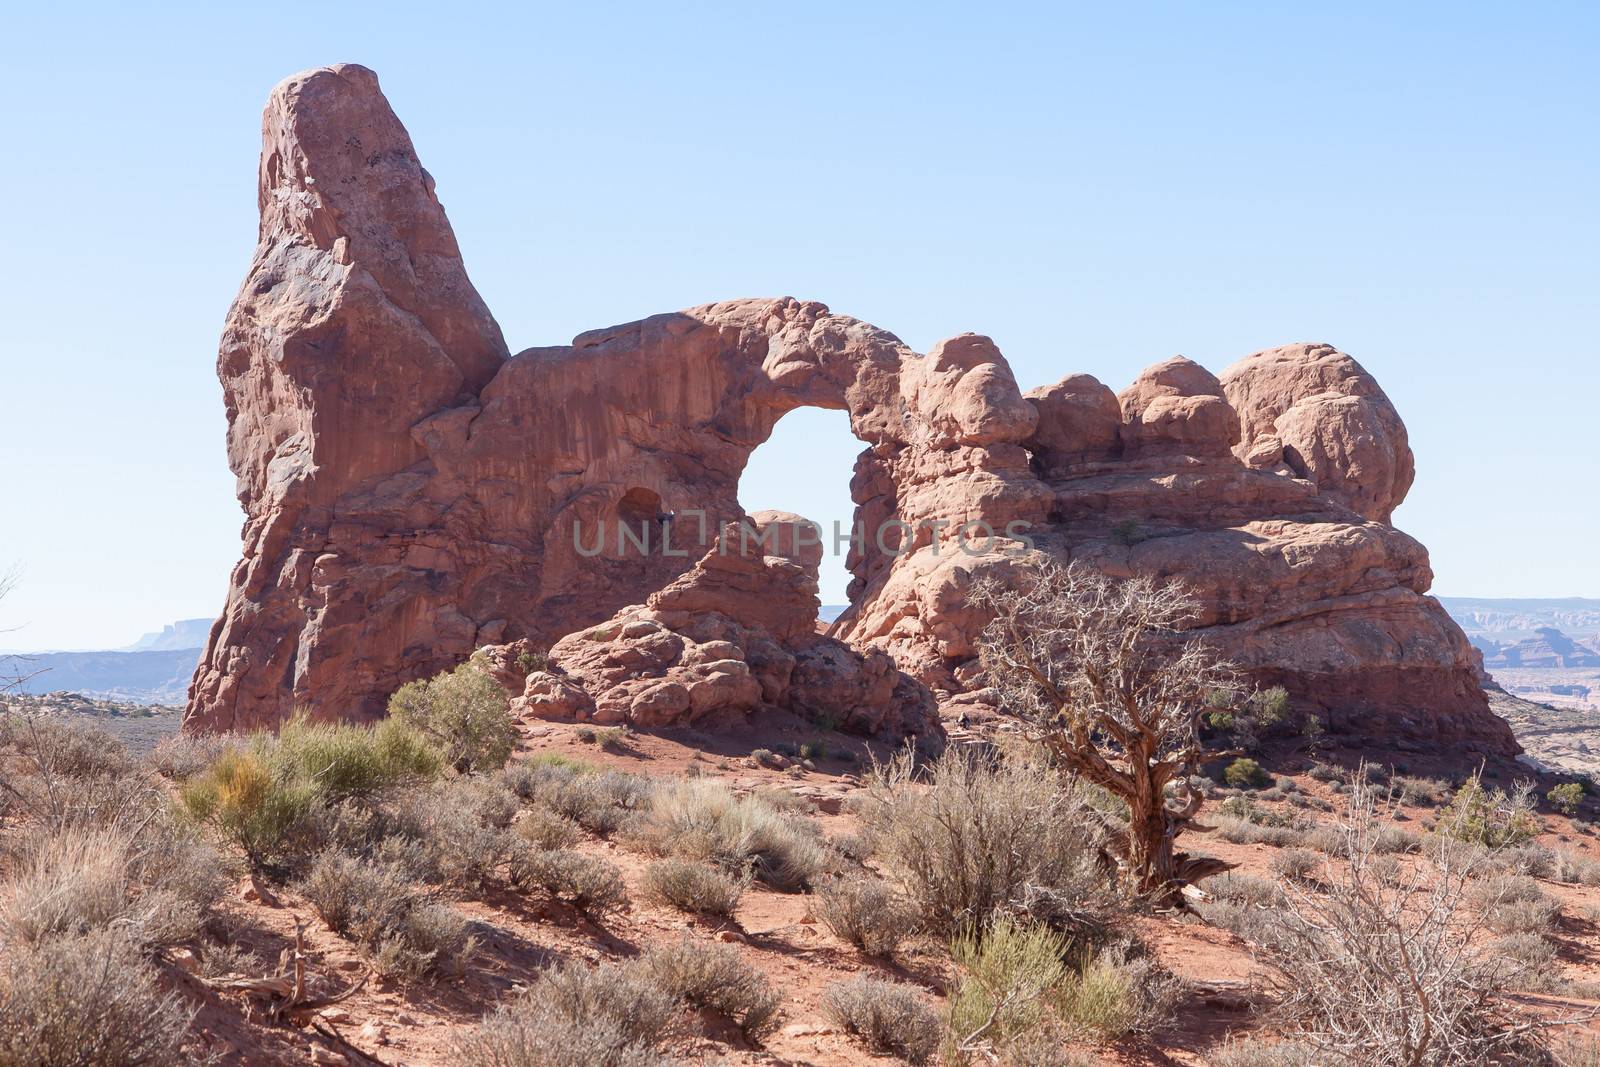 Arches National Park is the home of numerous arches and incredible rock formations.